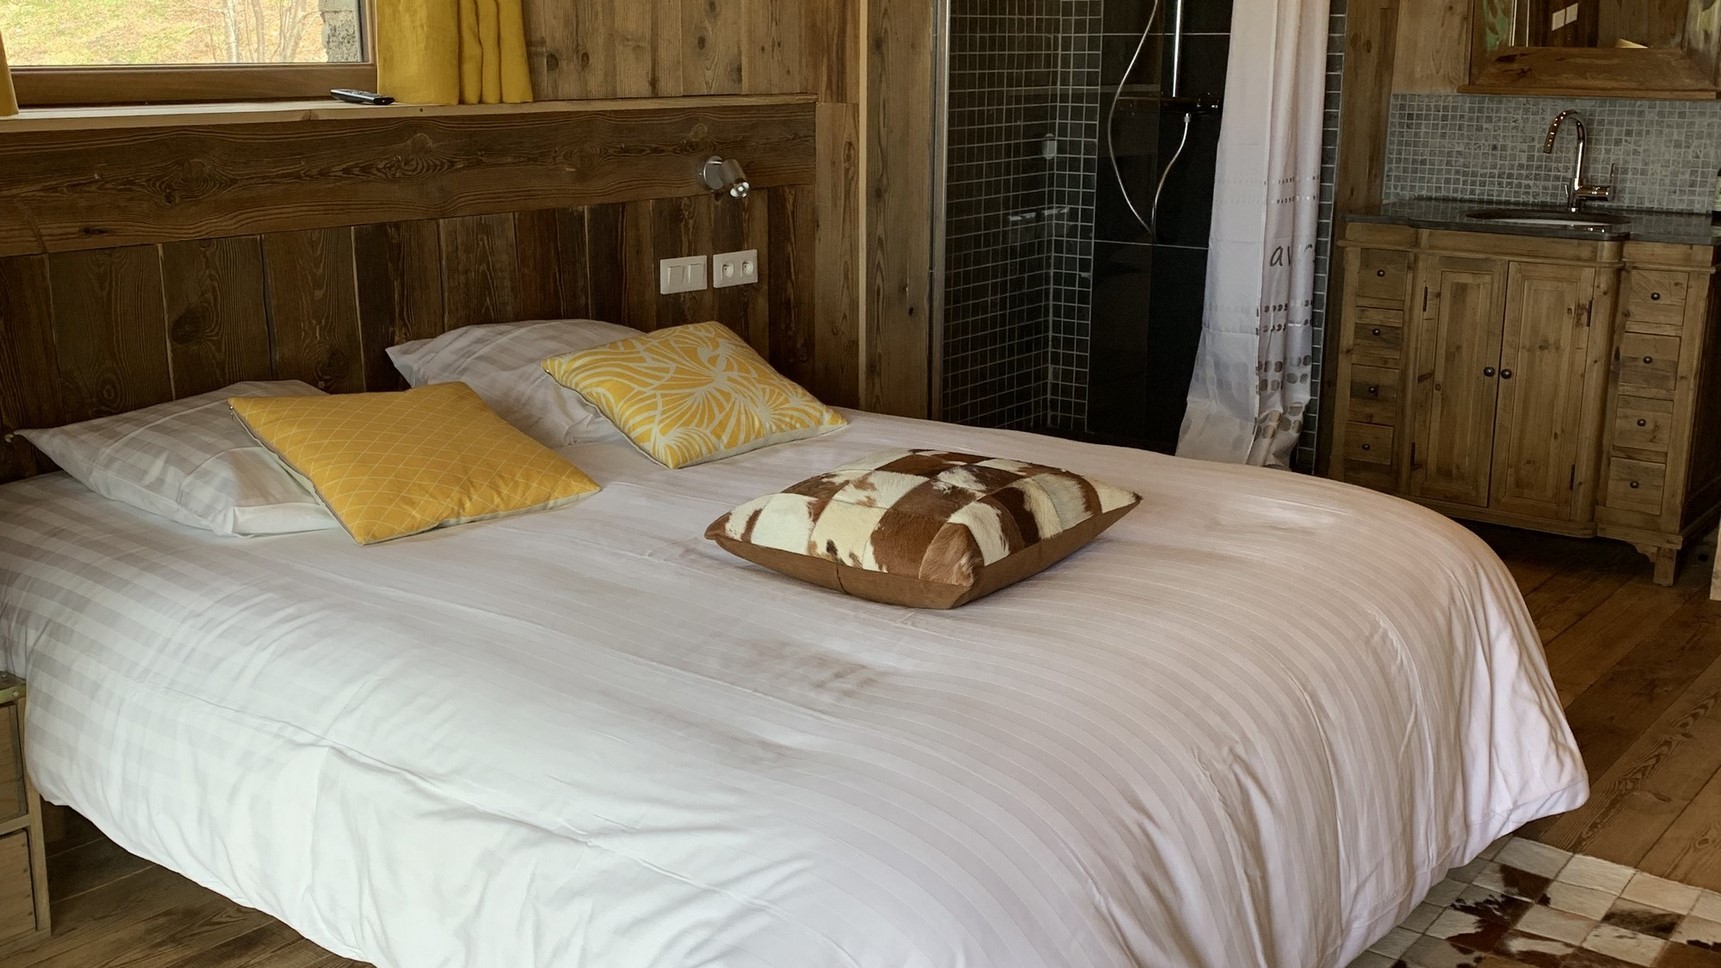 Super Besse chalet, Anorak chalet, waterfall room, king size bed